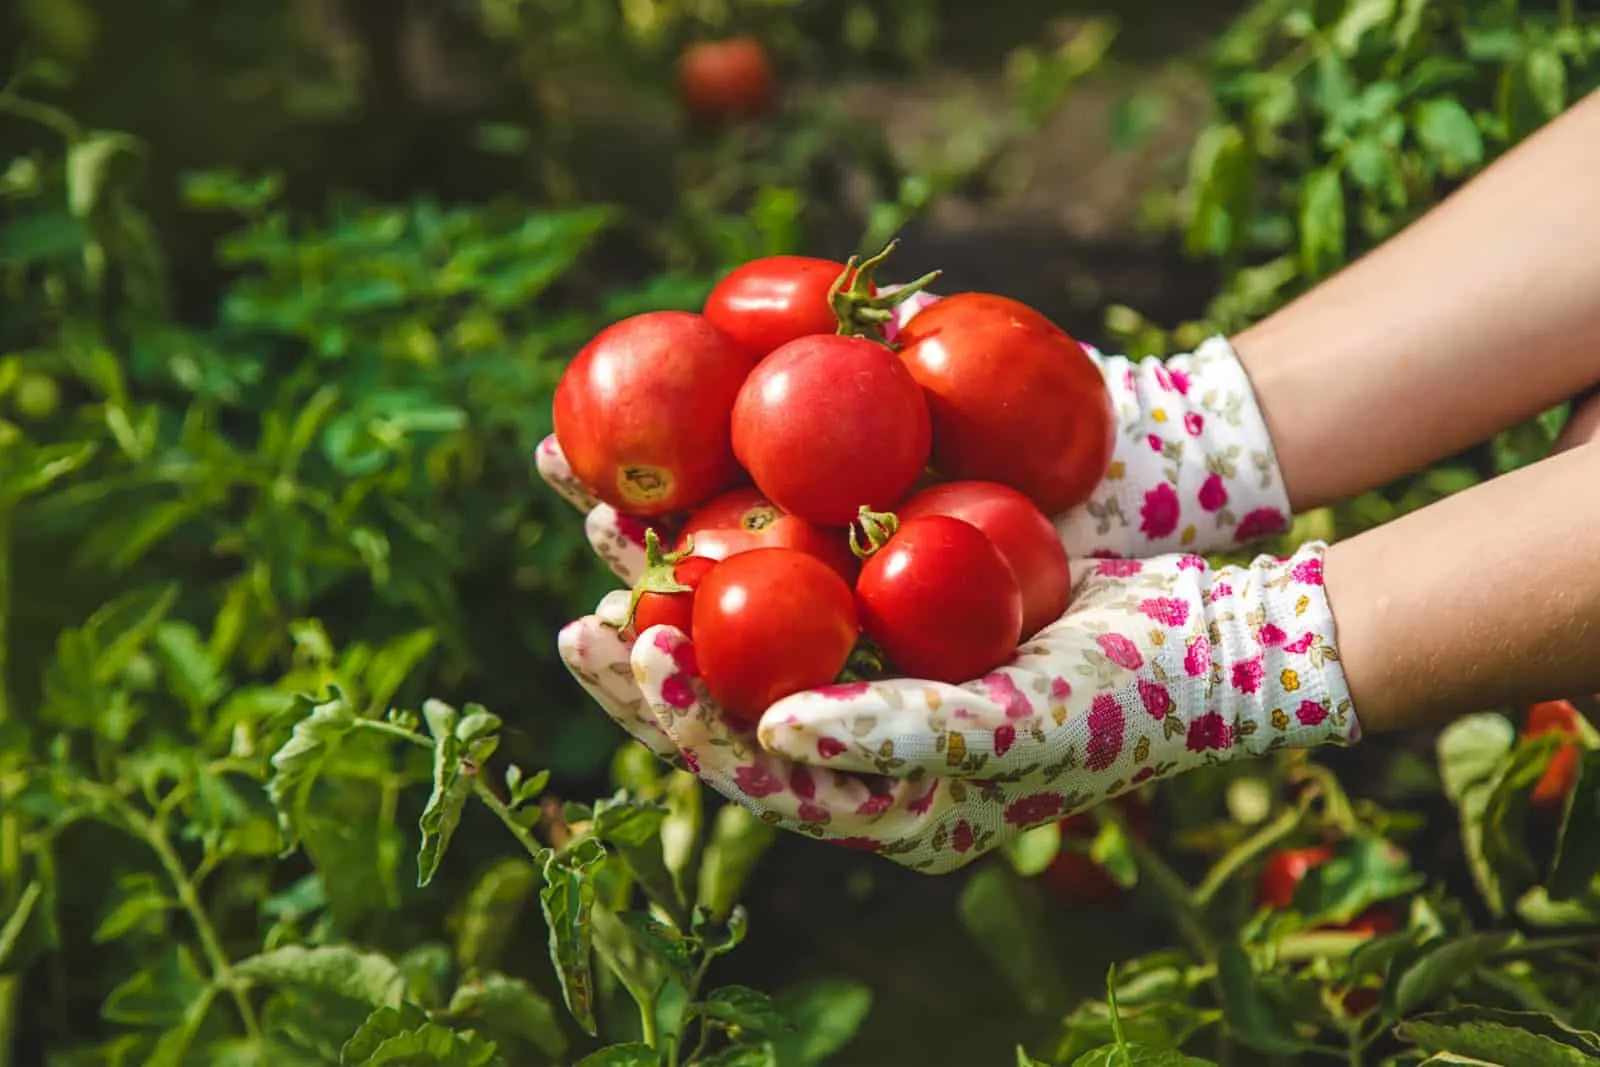 The farmer harvests tomatoes in the garden.